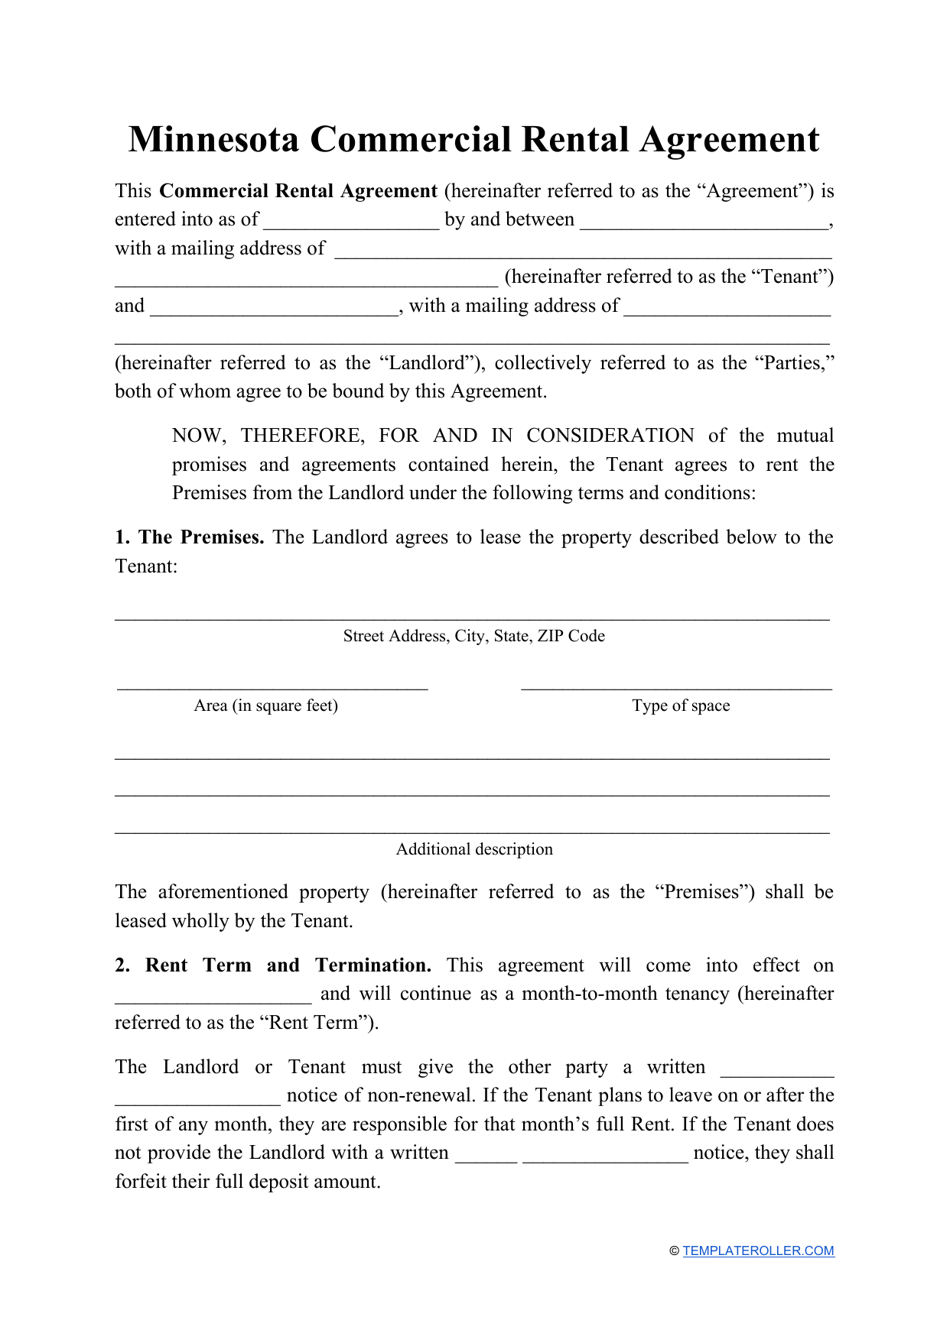 Commercial Rental Agreement Template - Minnesota, Page 1